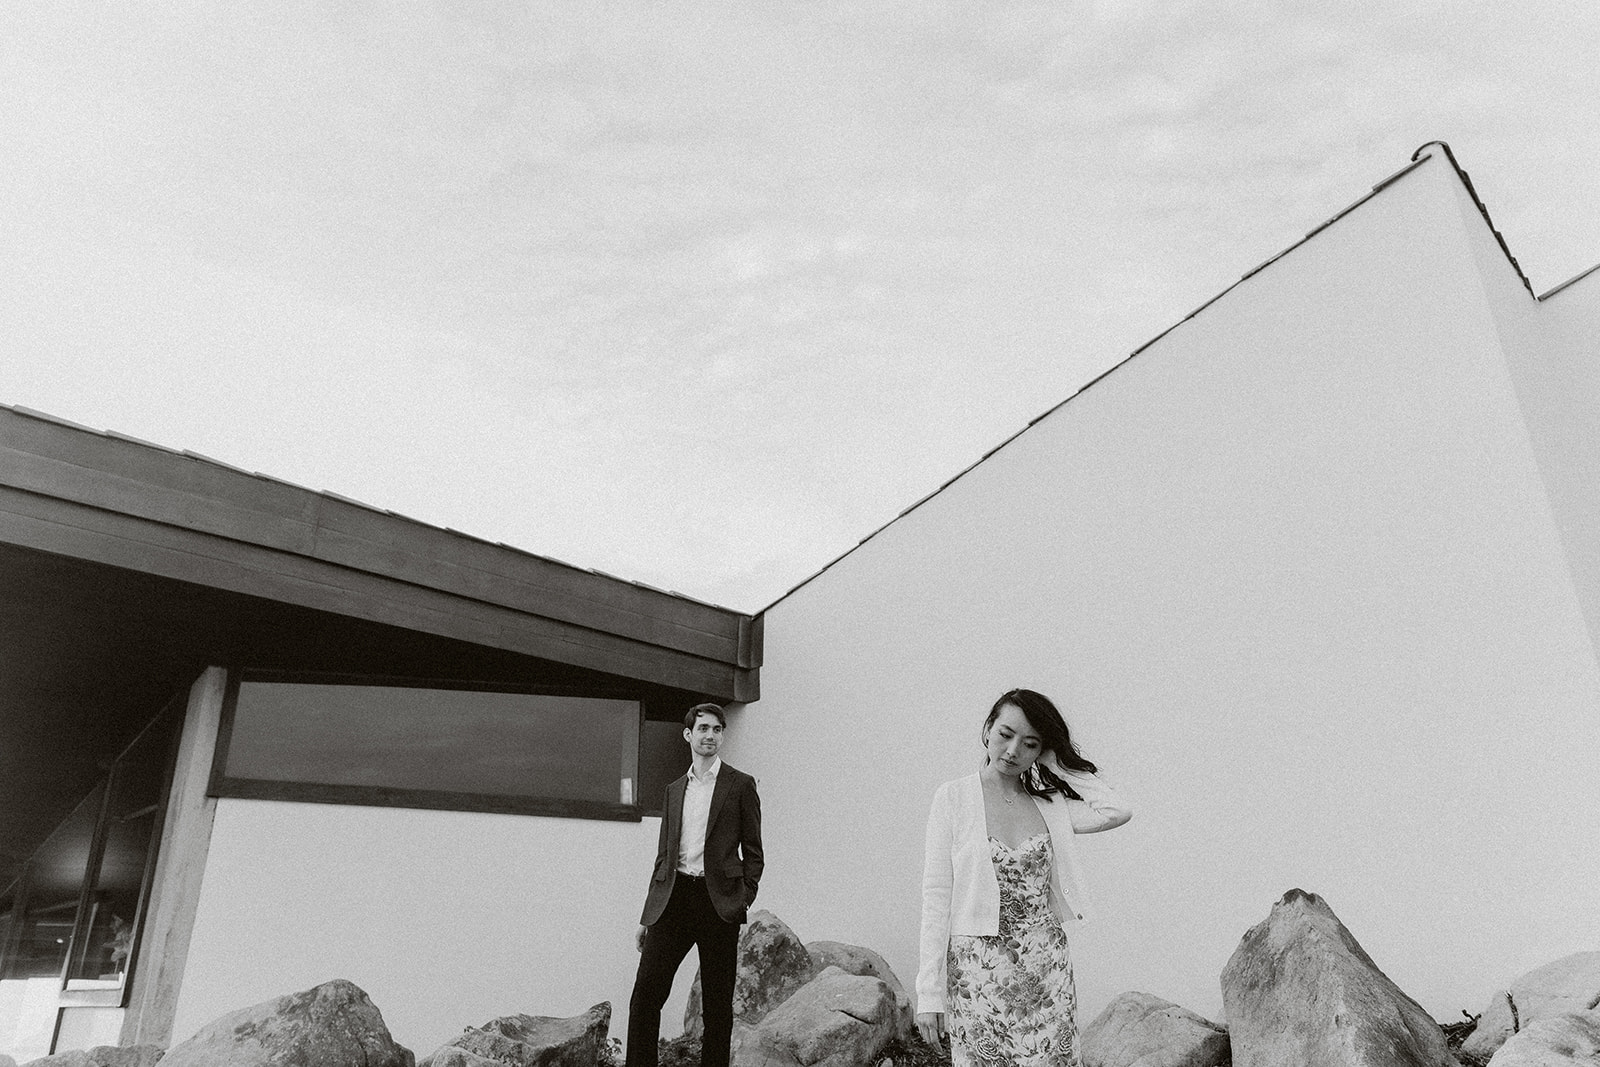 An ocean inspired editorial architectural engagement session in Siza Vieira's Tidal Pools and Boa Nova Tea House.